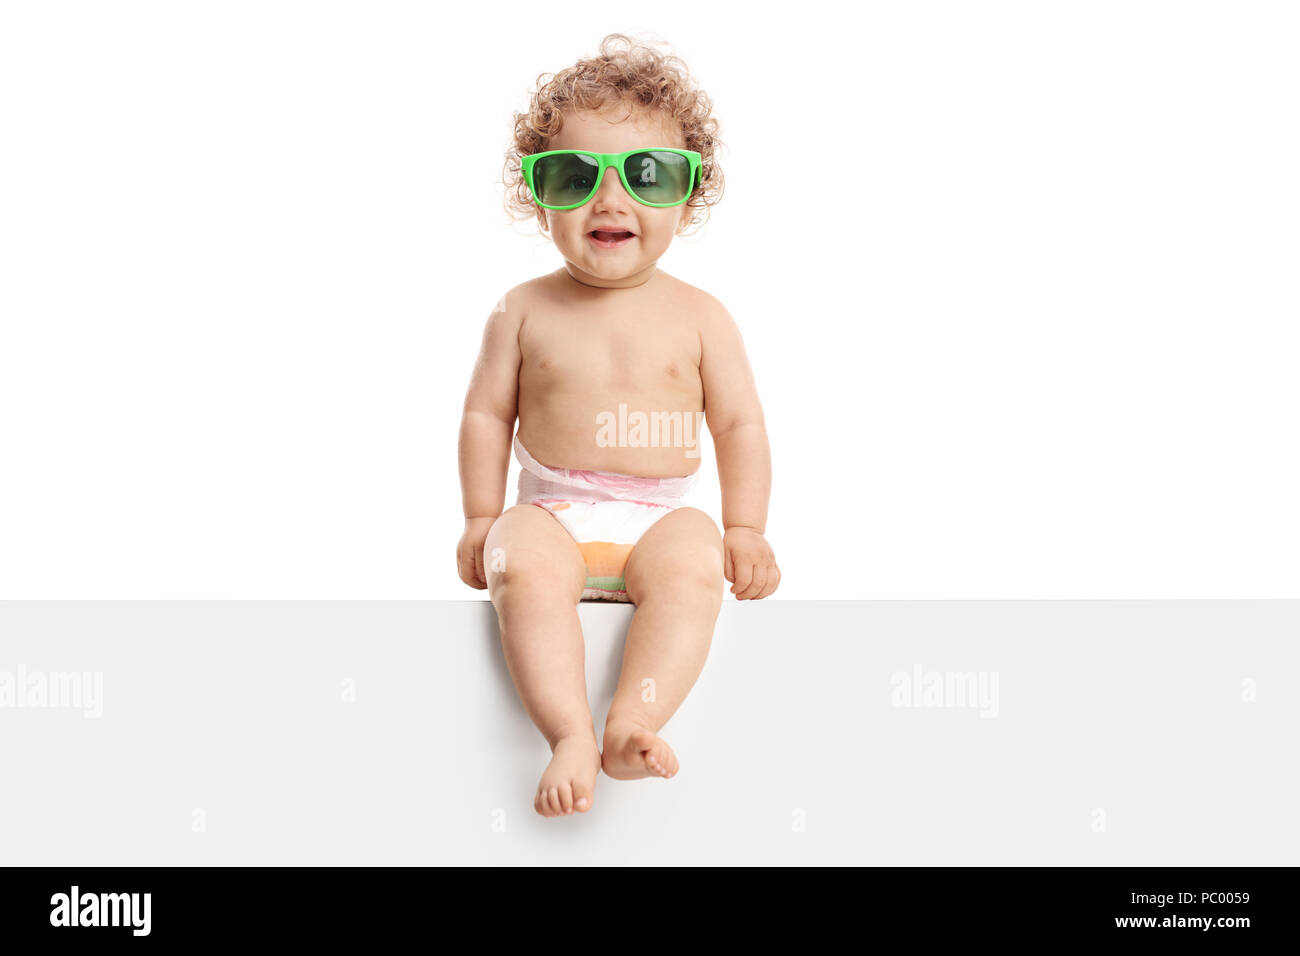 Adorable baby boy with a pair of sunglasses sitting on a panel isolated on white background Stock Photo